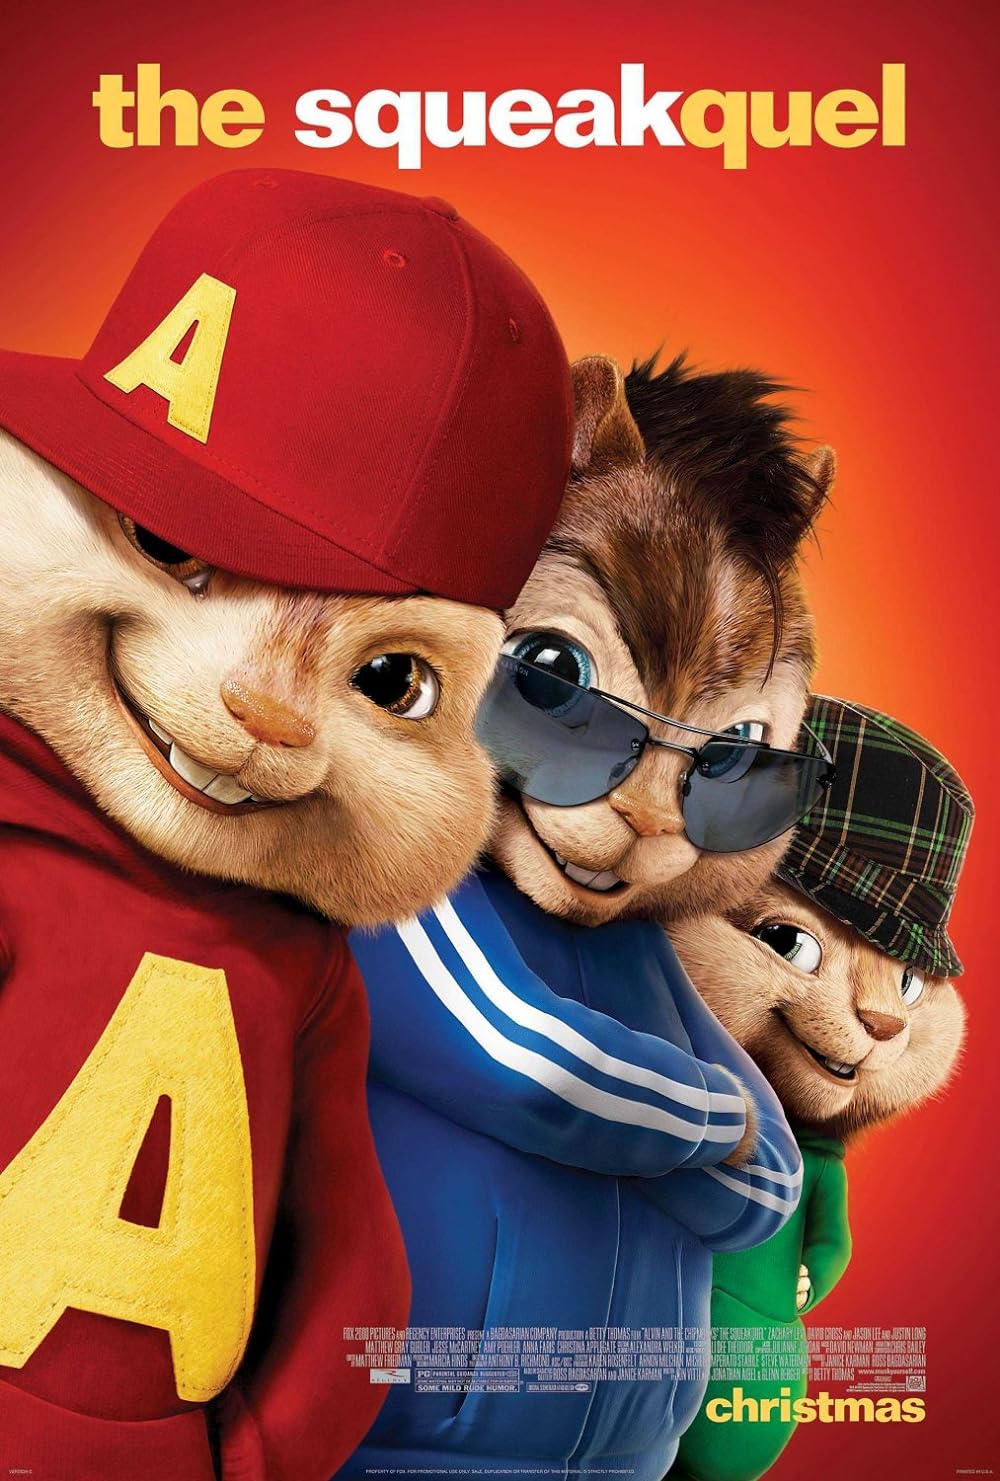 belinda harvy recommends Which Chipmunk Is Getting The Best Head